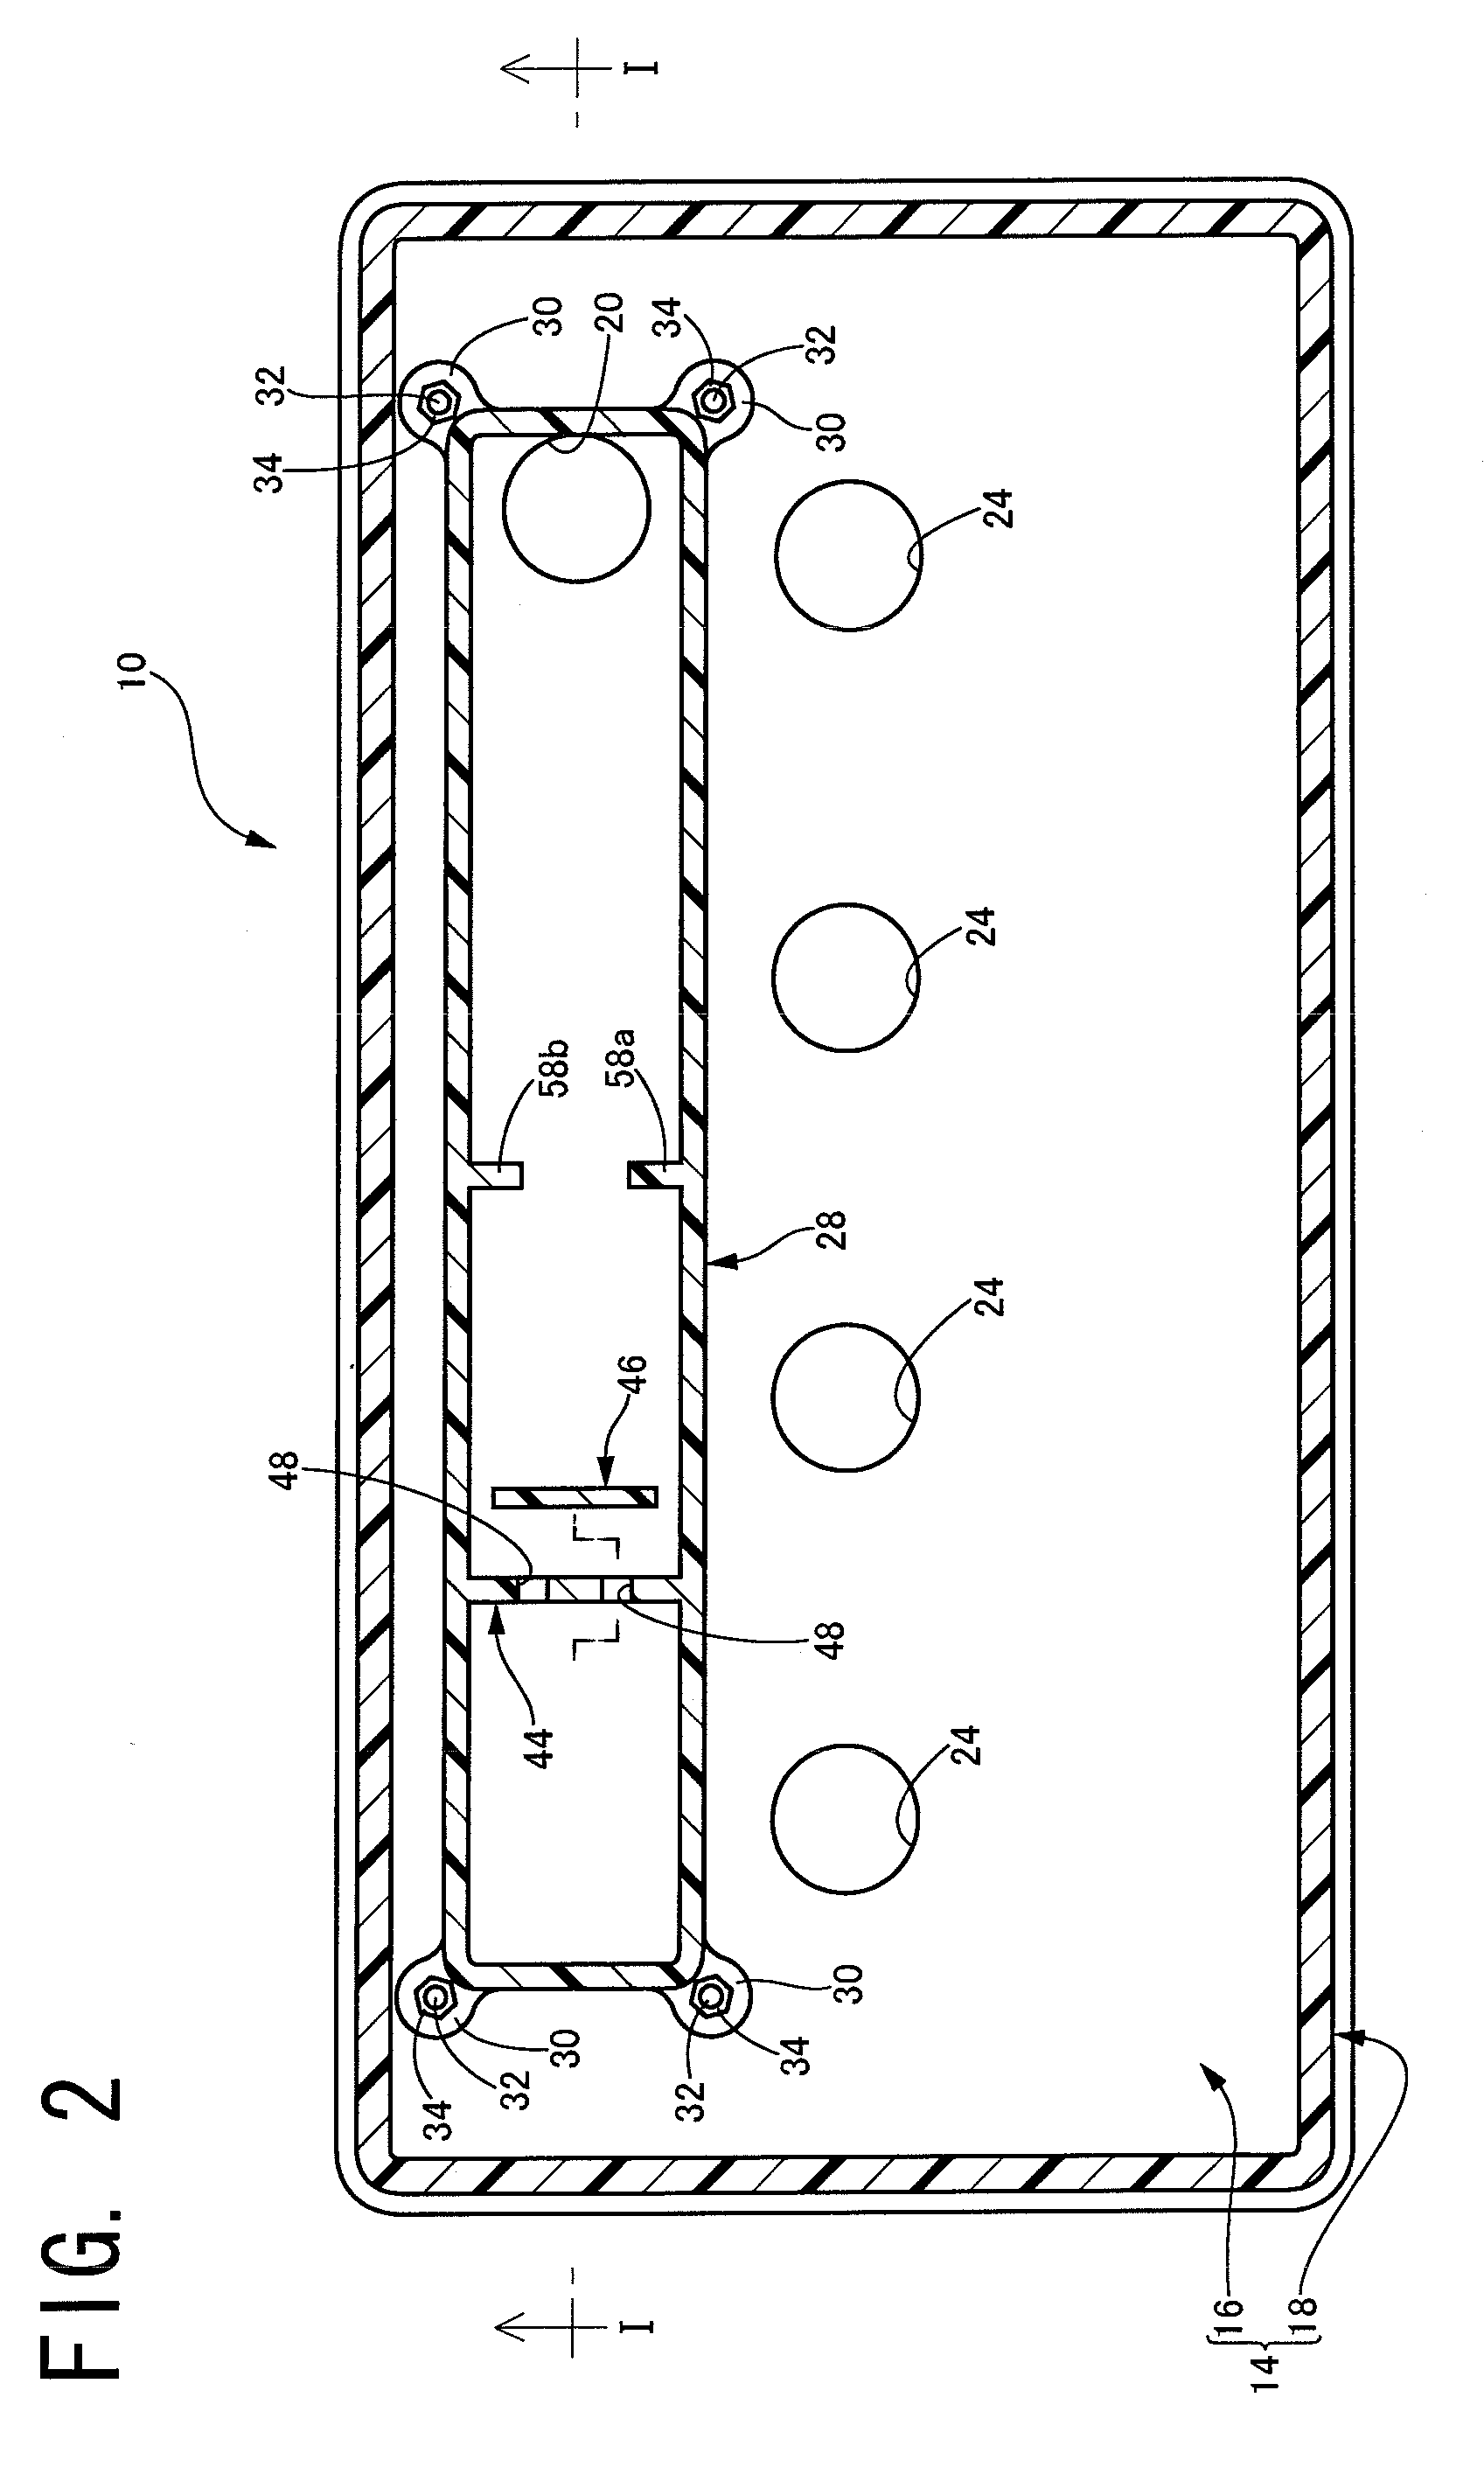 Oil separator for blowby gas